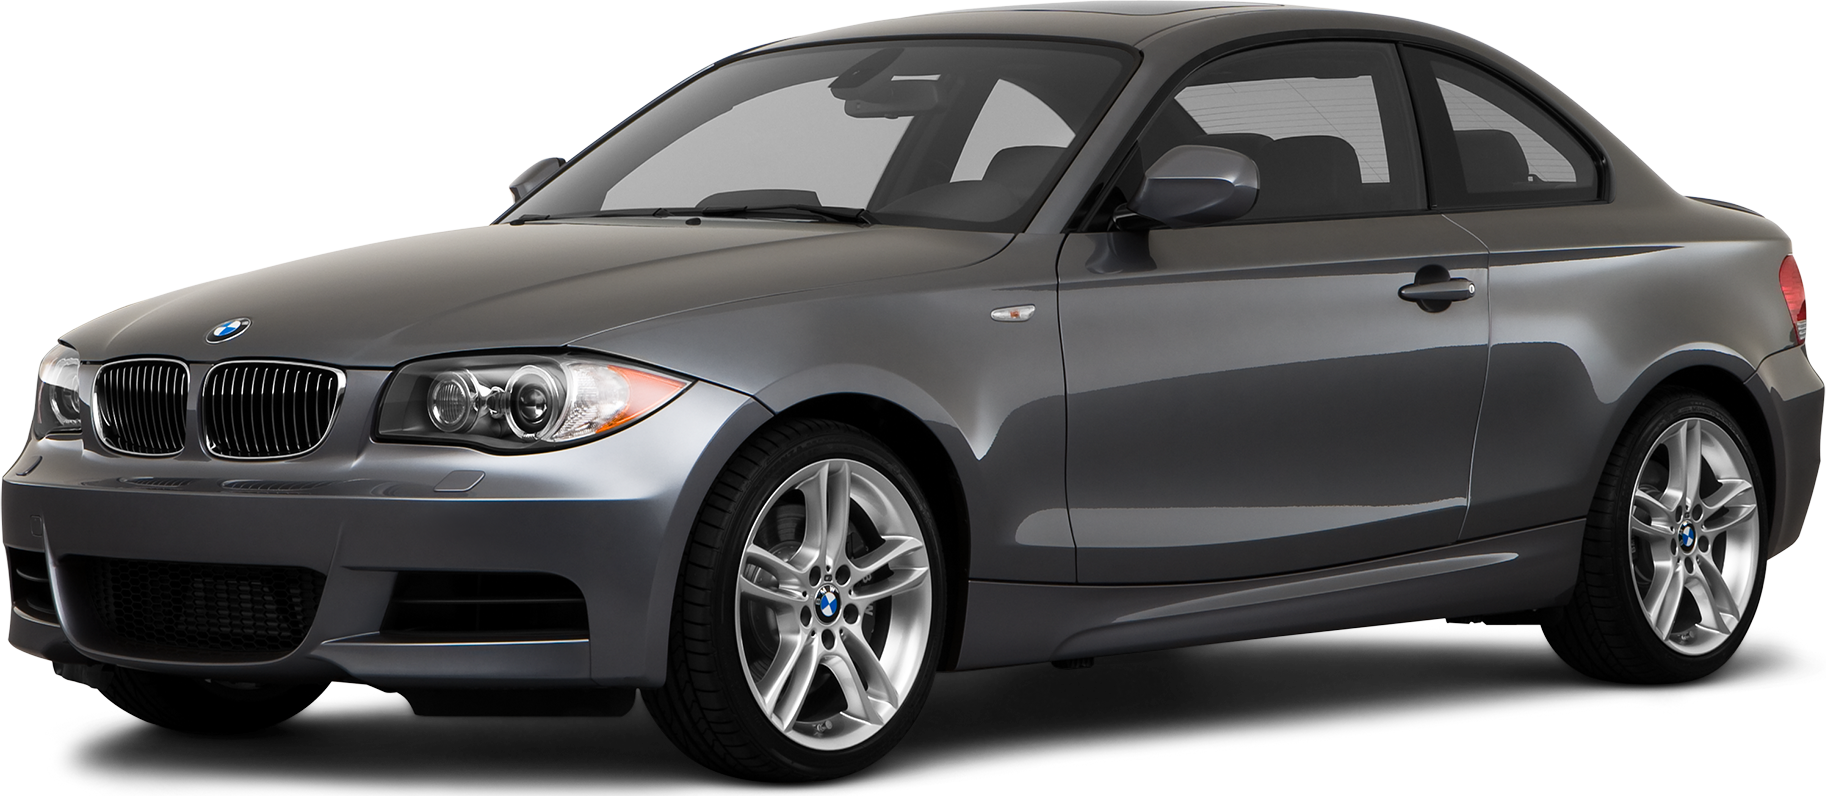 10 Bmw 1 Series Price Kbb Value Cars For Sale Kelley Blue Book